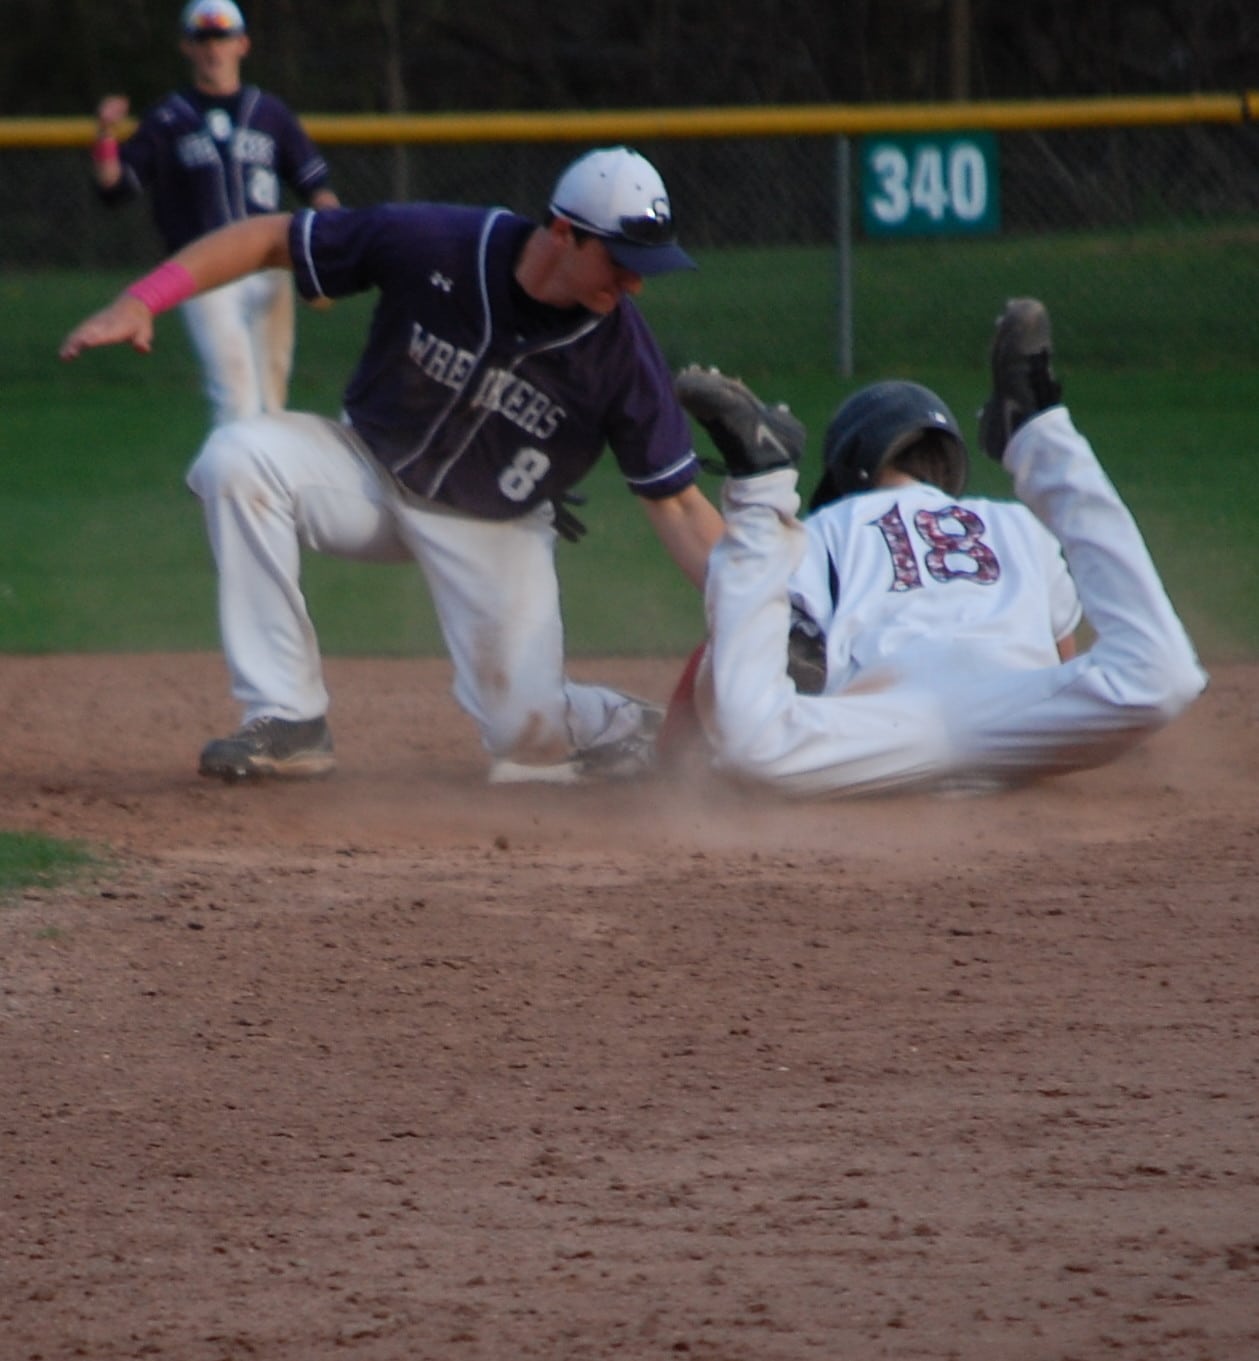 Adam Dulsky nails New Canaan baserunner trying to steal, Sam Ellinwood applies the tag!